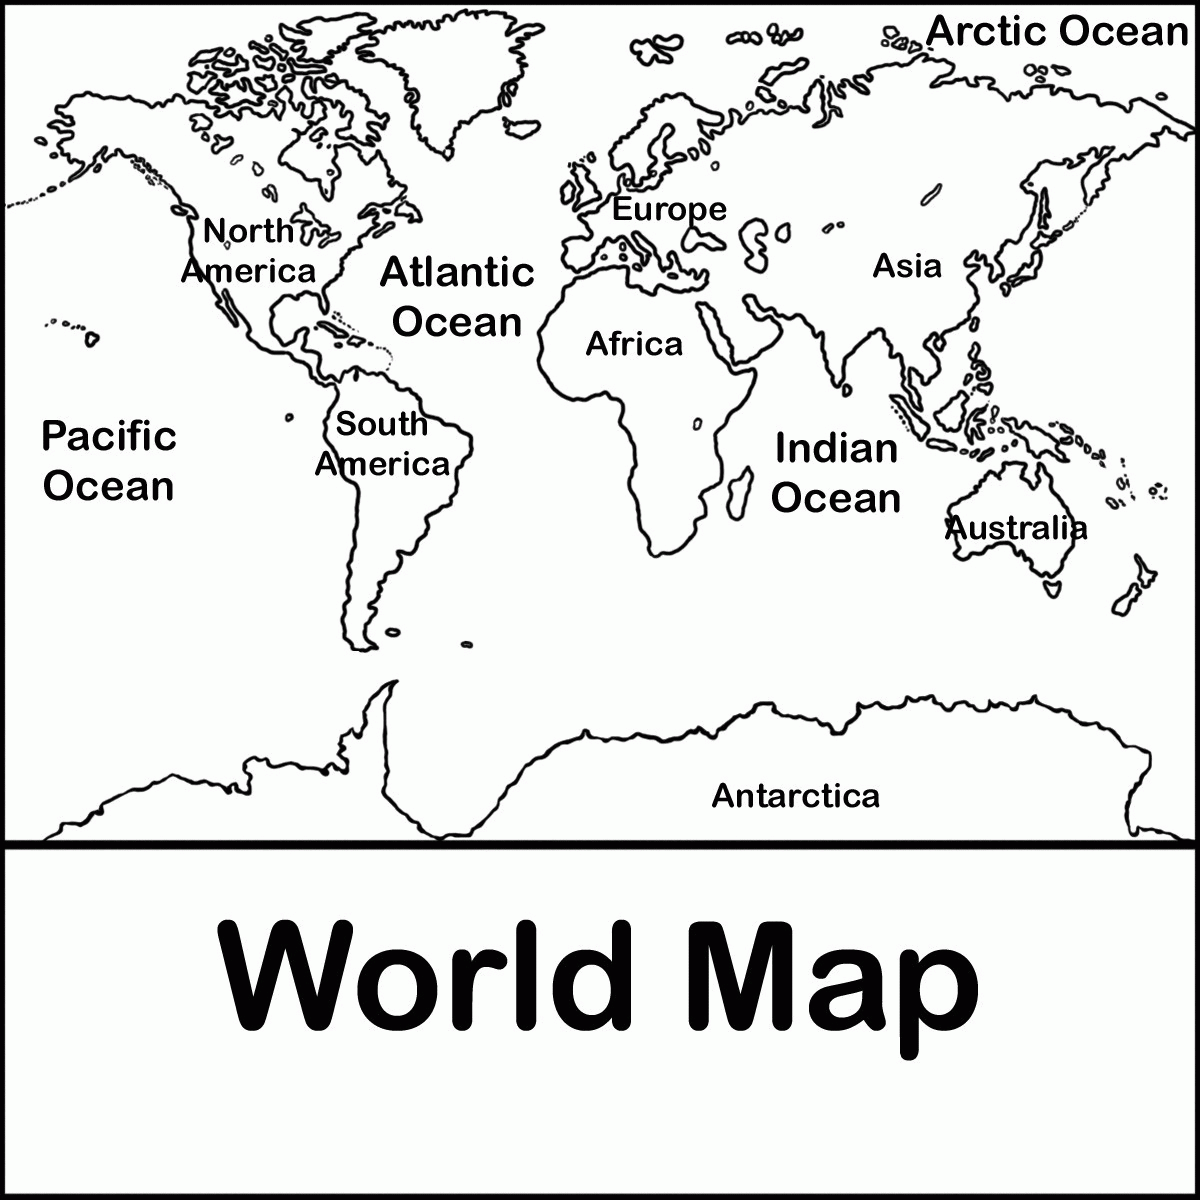 World Map Coloring Pages World Map Printable World Map Coloring Page Images